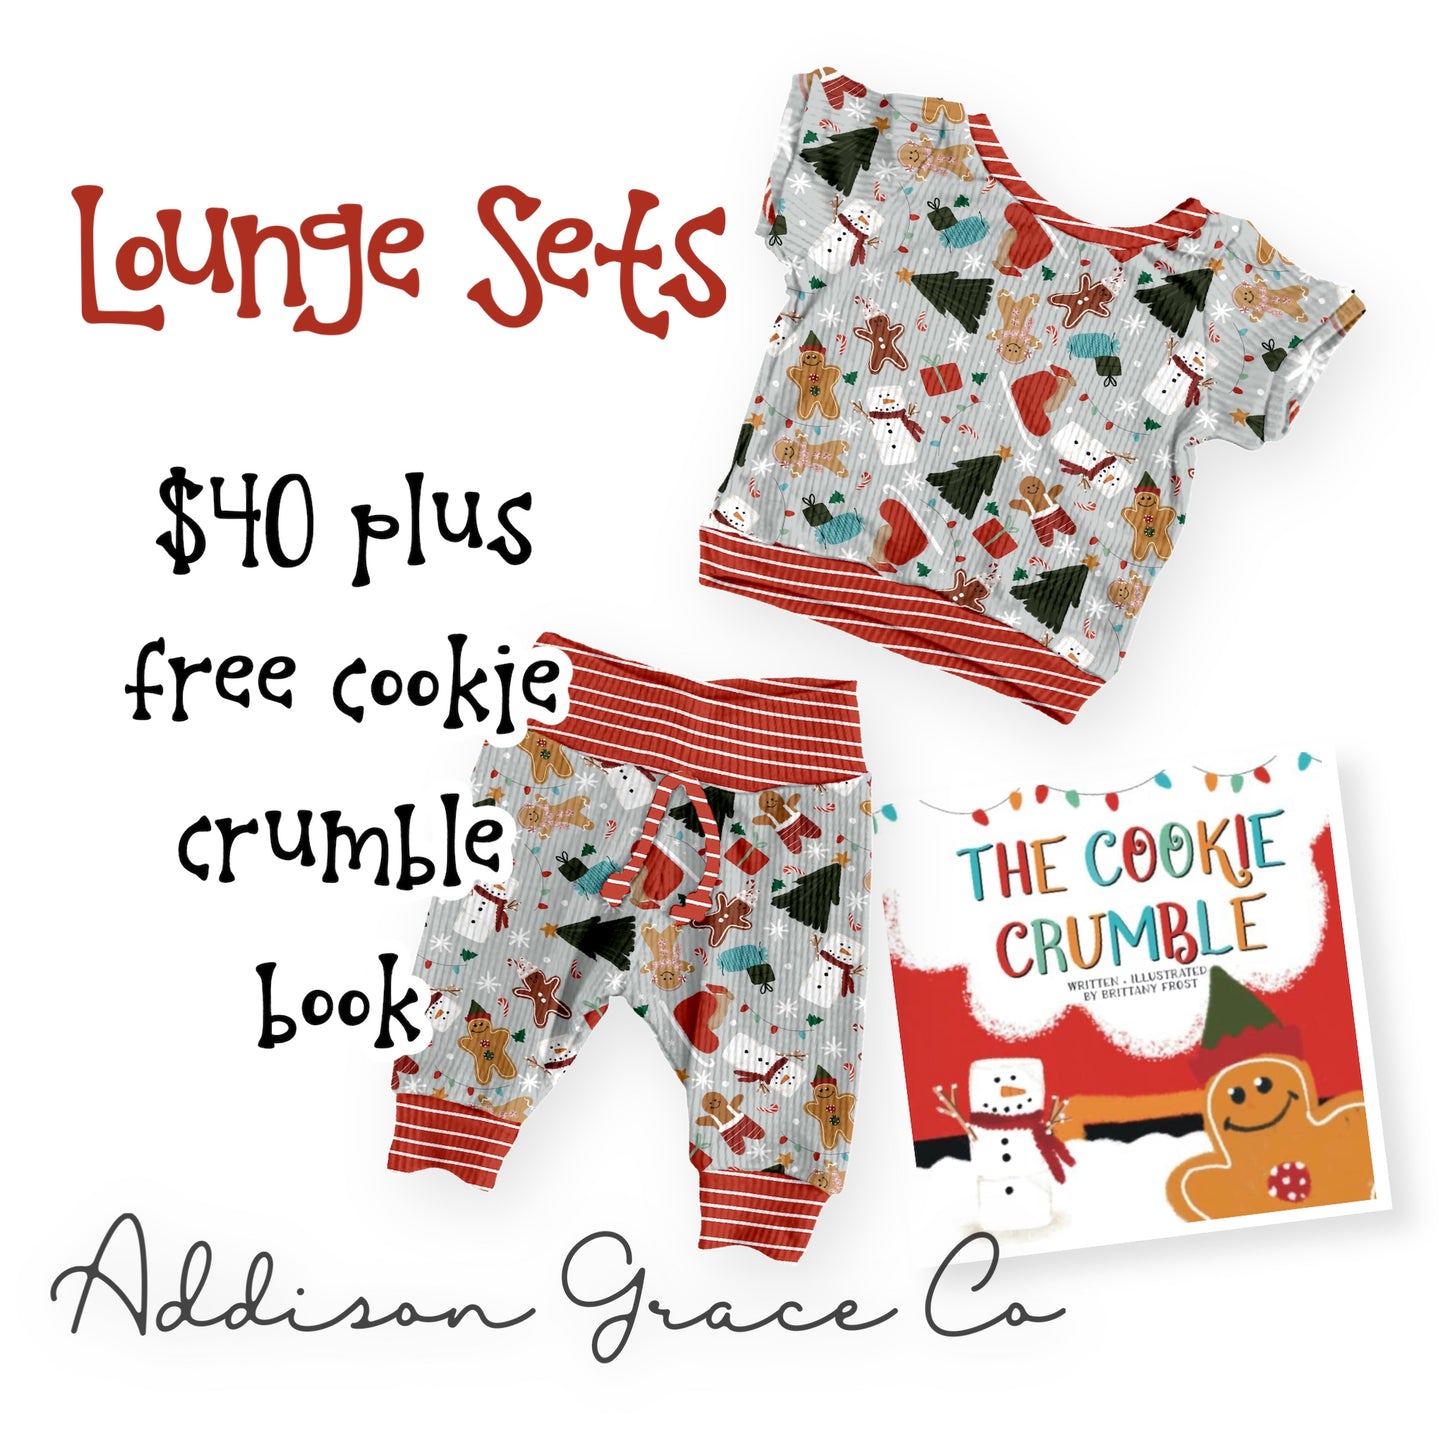 Cookie Crumble Lounge Sets